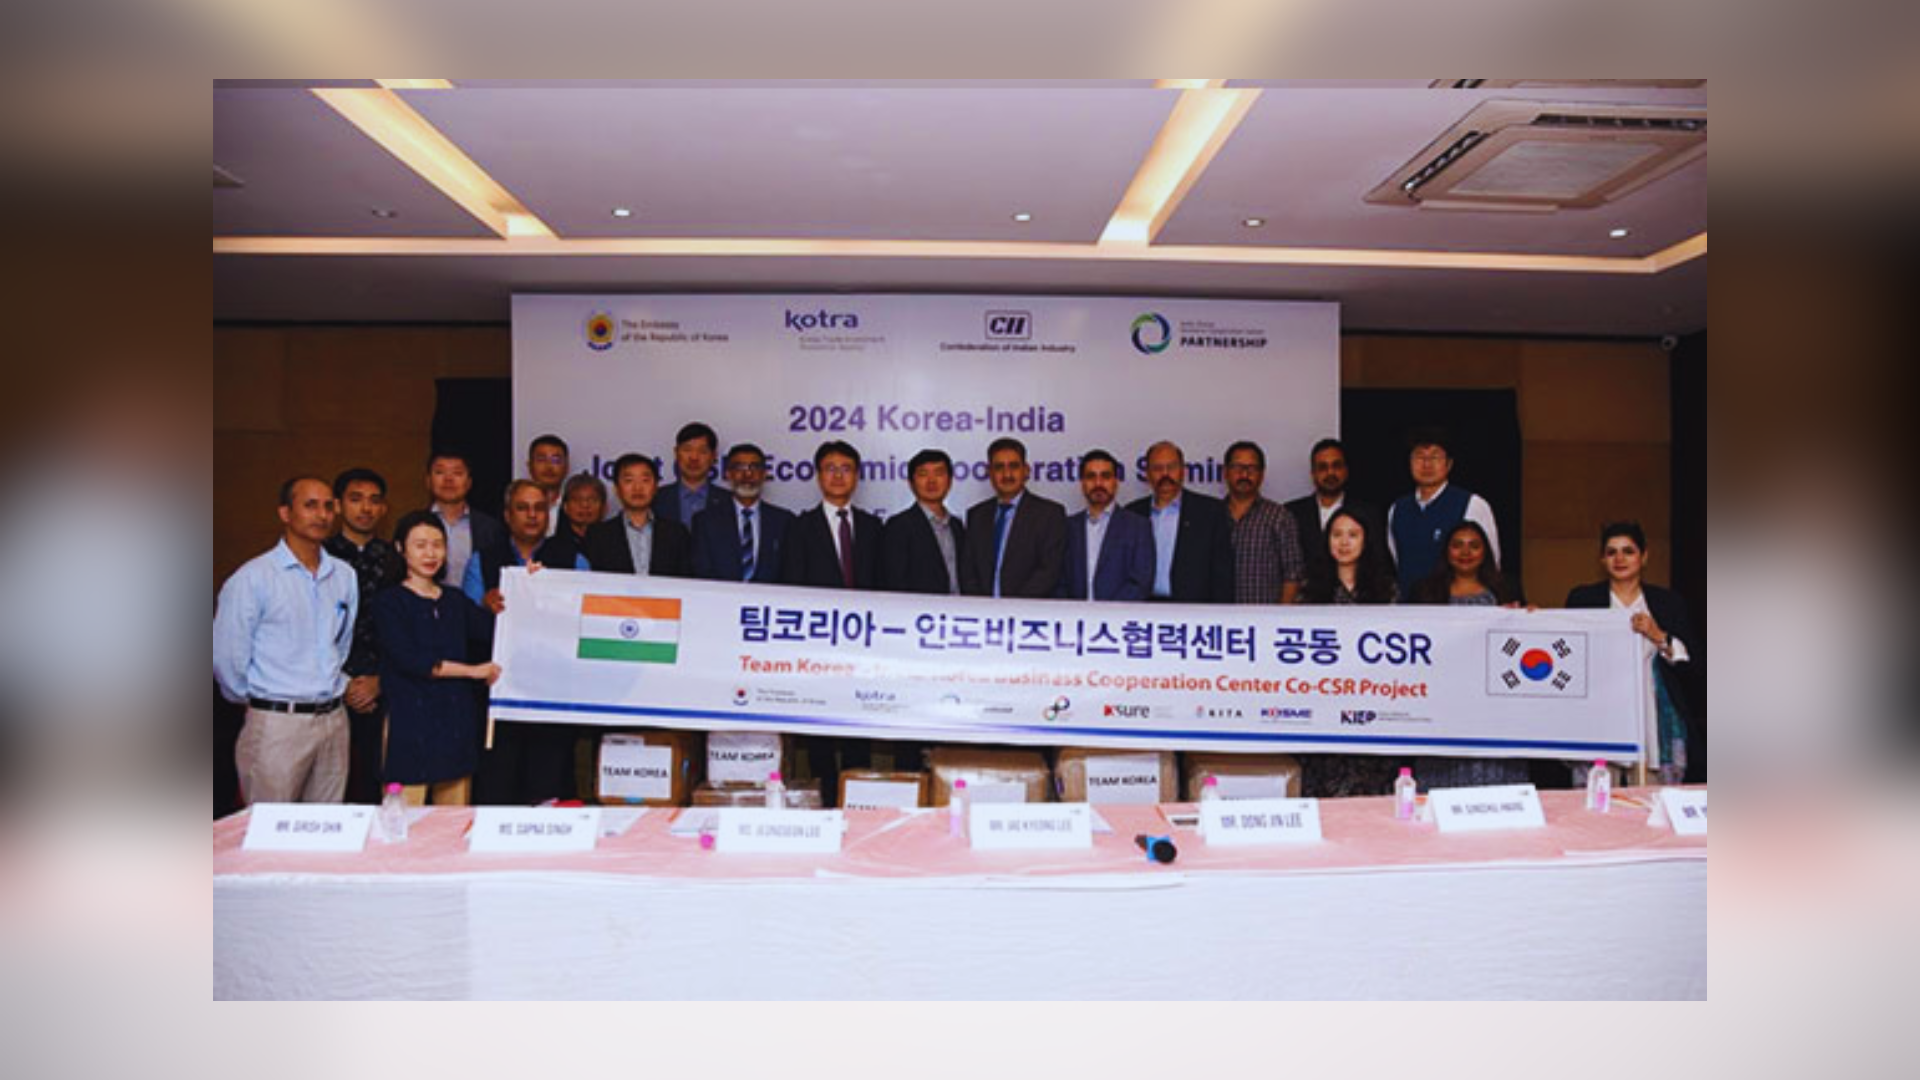 Korea’s Delegation Ventures To J&K: Uncovering Economic Prospects And Driving CSR Initiatives